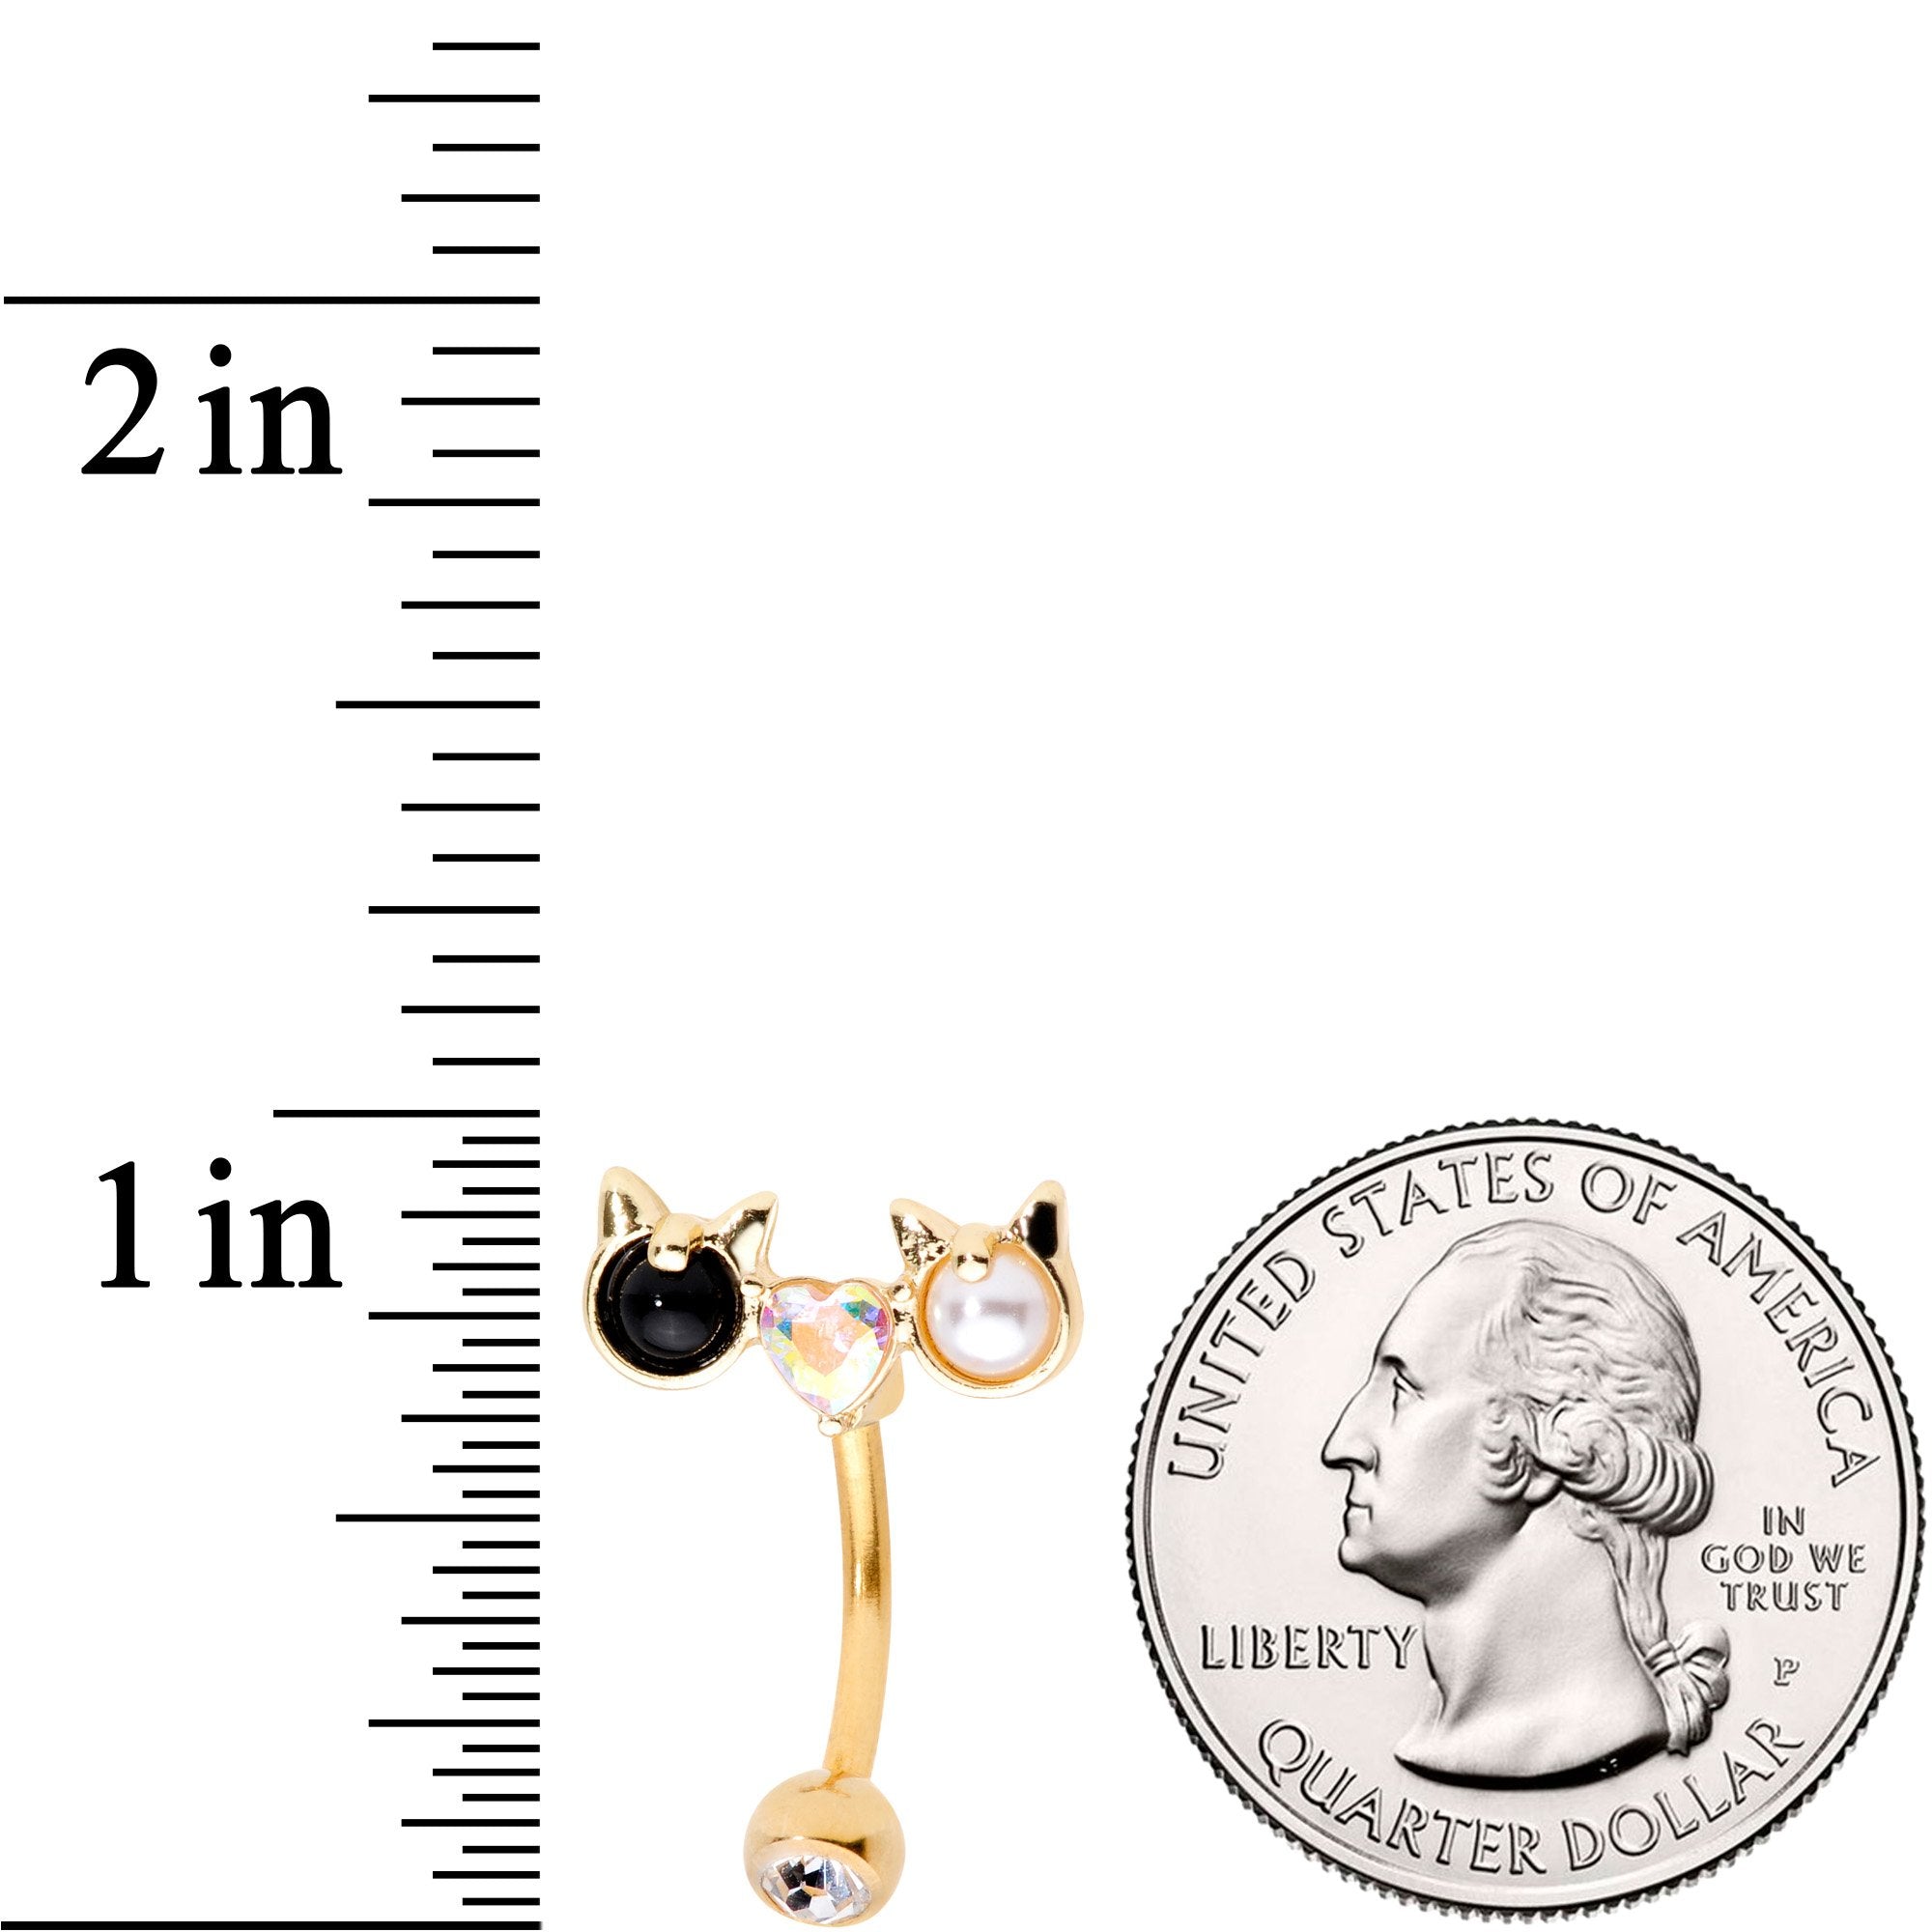 Clear Black CZ Gem Gold Tone Luv Kitty Cat Reversible Belly Ring